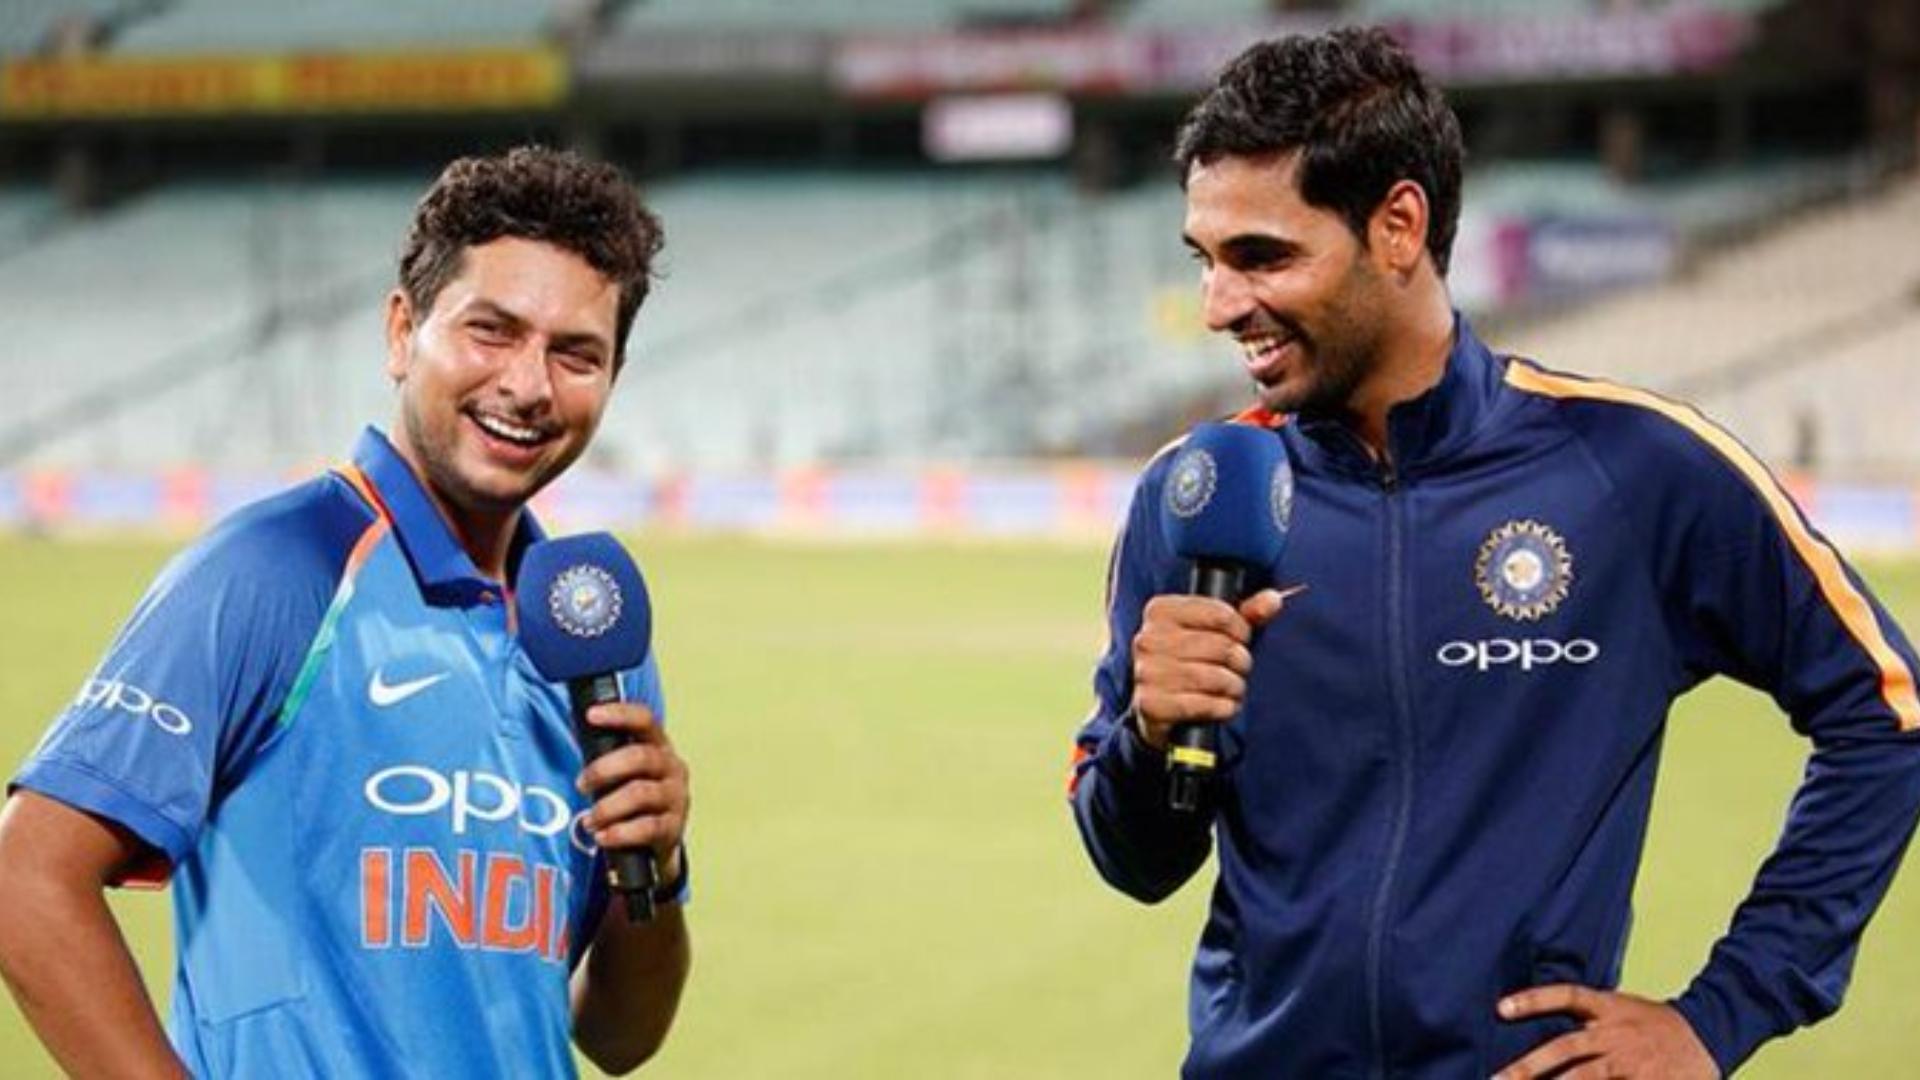 Kuldeep Yadav, Bhuvneshwar Kumar, Hardik Pandya and Prithvi Shaw are the Indian cricket team players who were not picked in the India side for their tour to England.